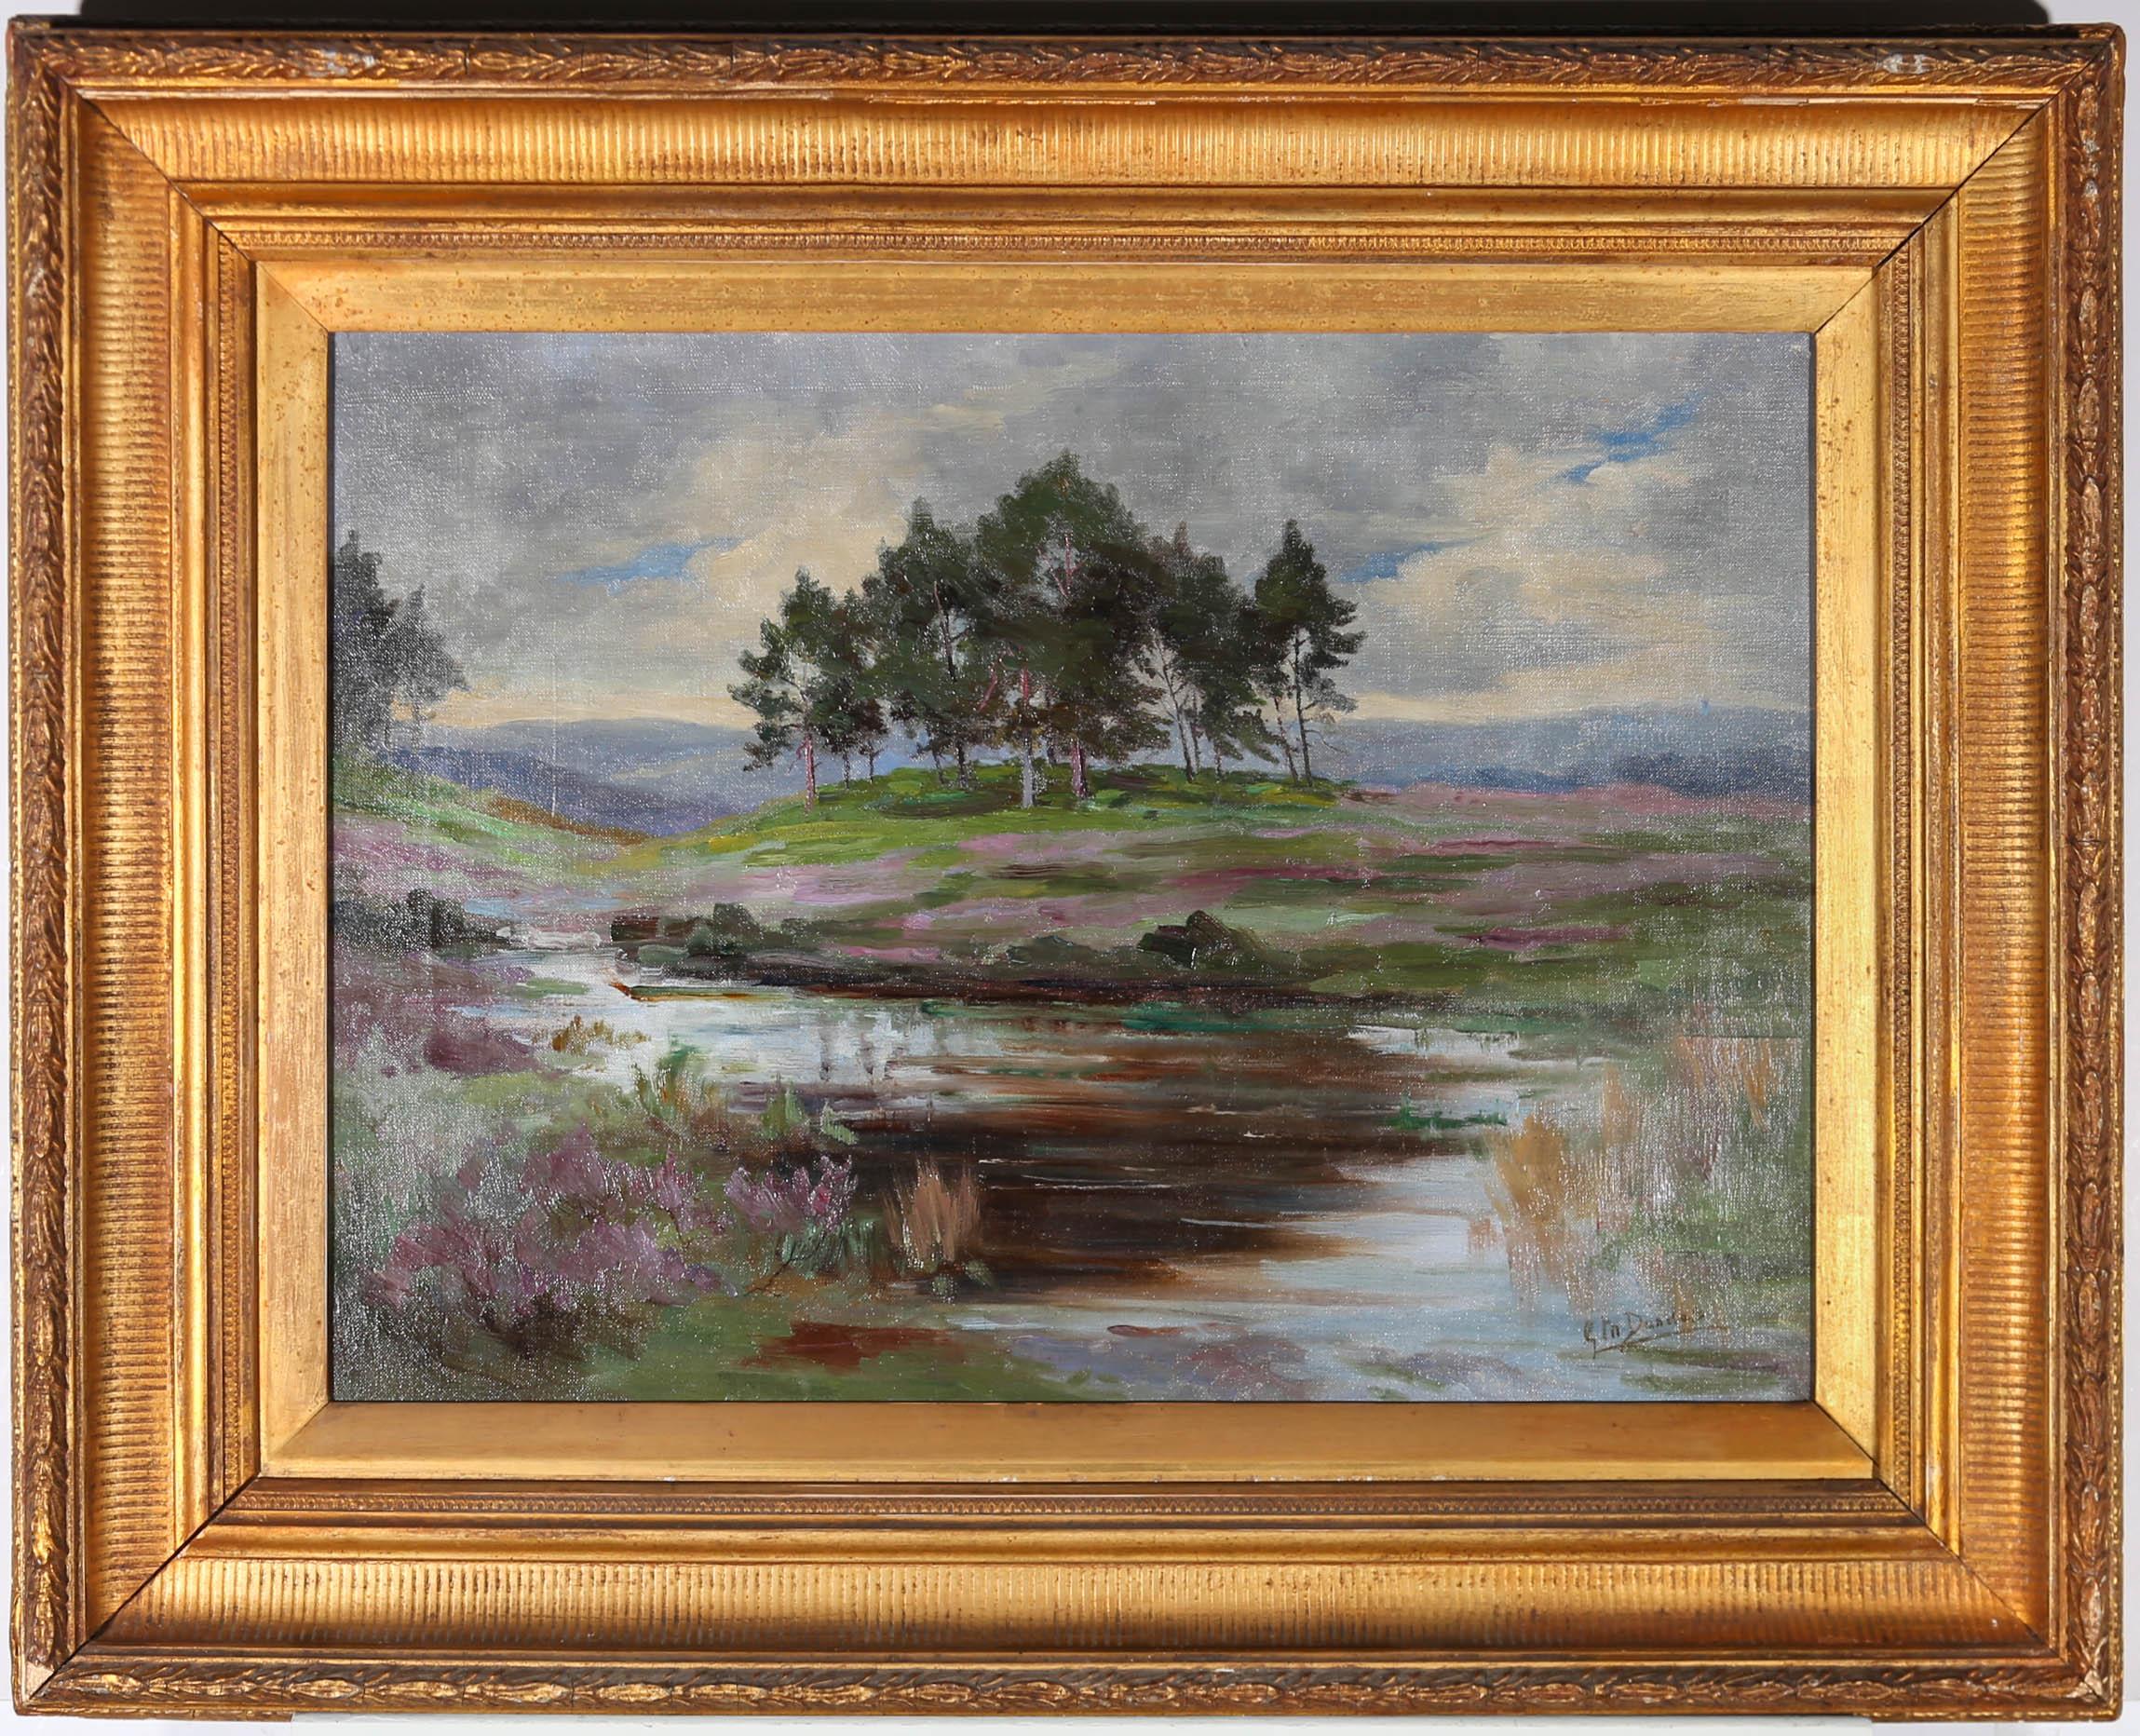 A beautiful mid century colourist landscape depicting a highland stream, surrounded by vibrant and refreshing purple heather and green bracken. The perfect spot for a fly fishing enthusiast. The painting is signed to the lower right-hand corner.